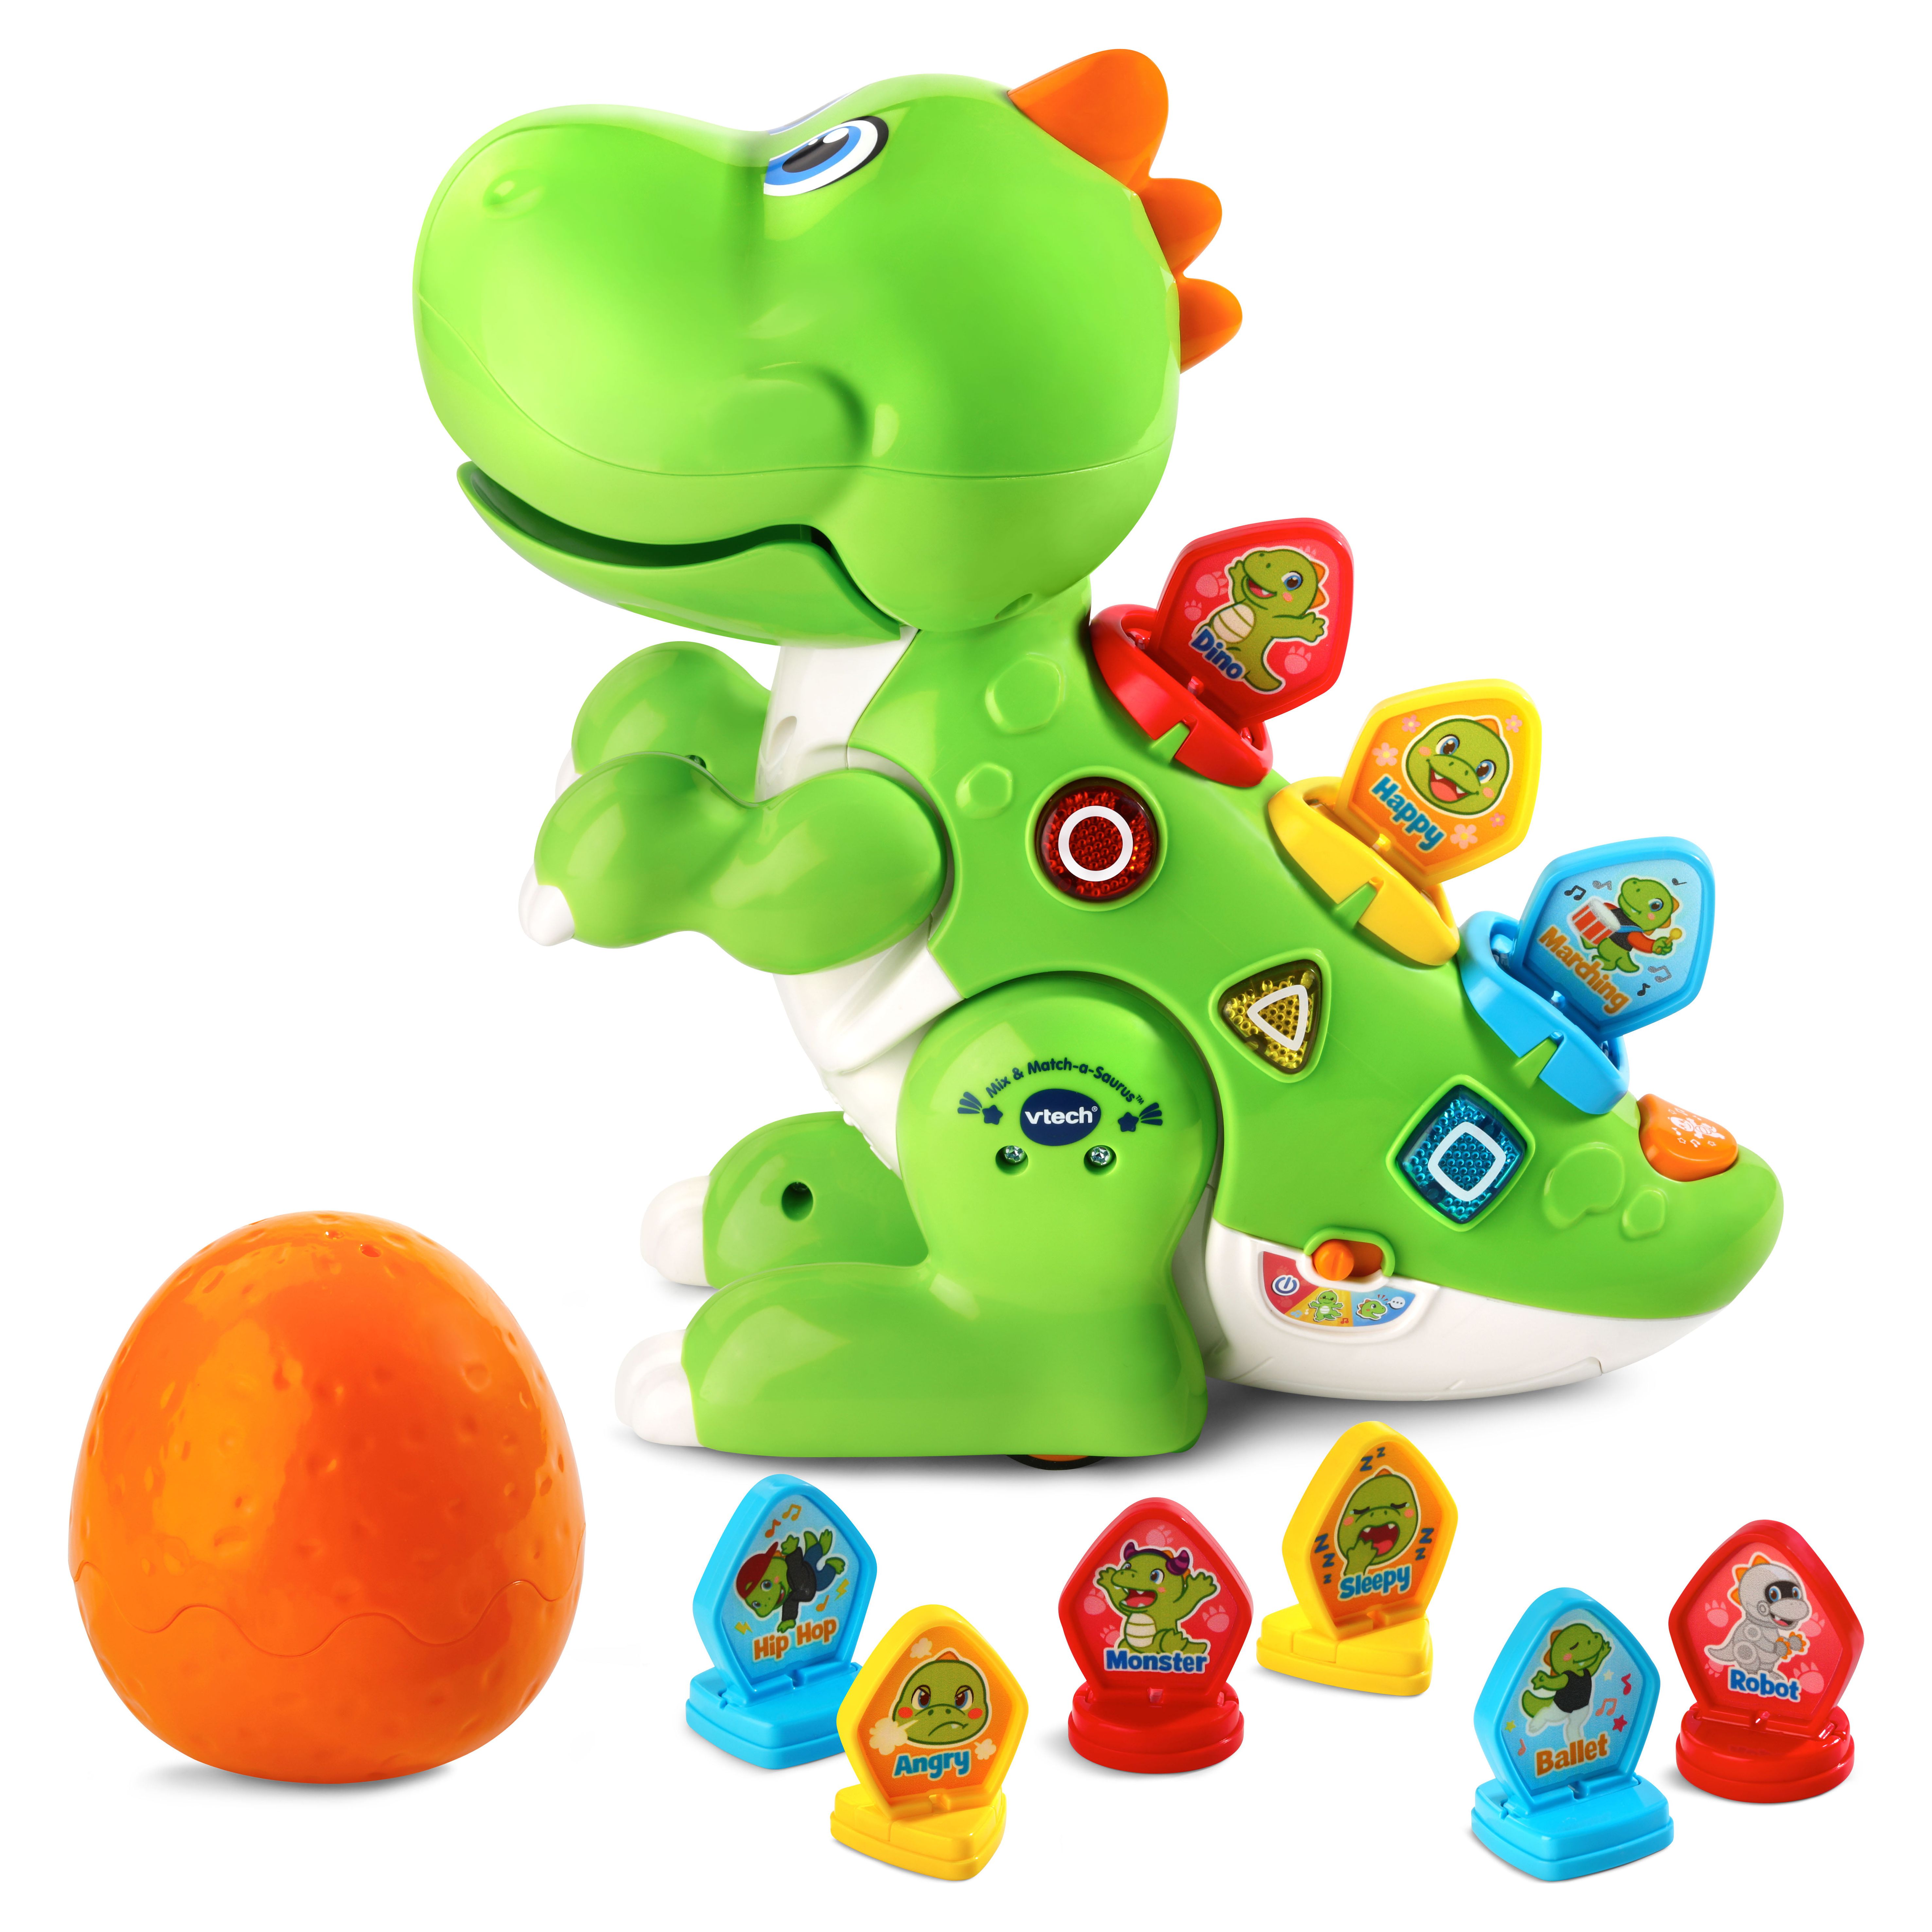 VTech Mix and Match-a-Saurus, Dinosaur Learning Toy for Kids, Green - image 7 of 10